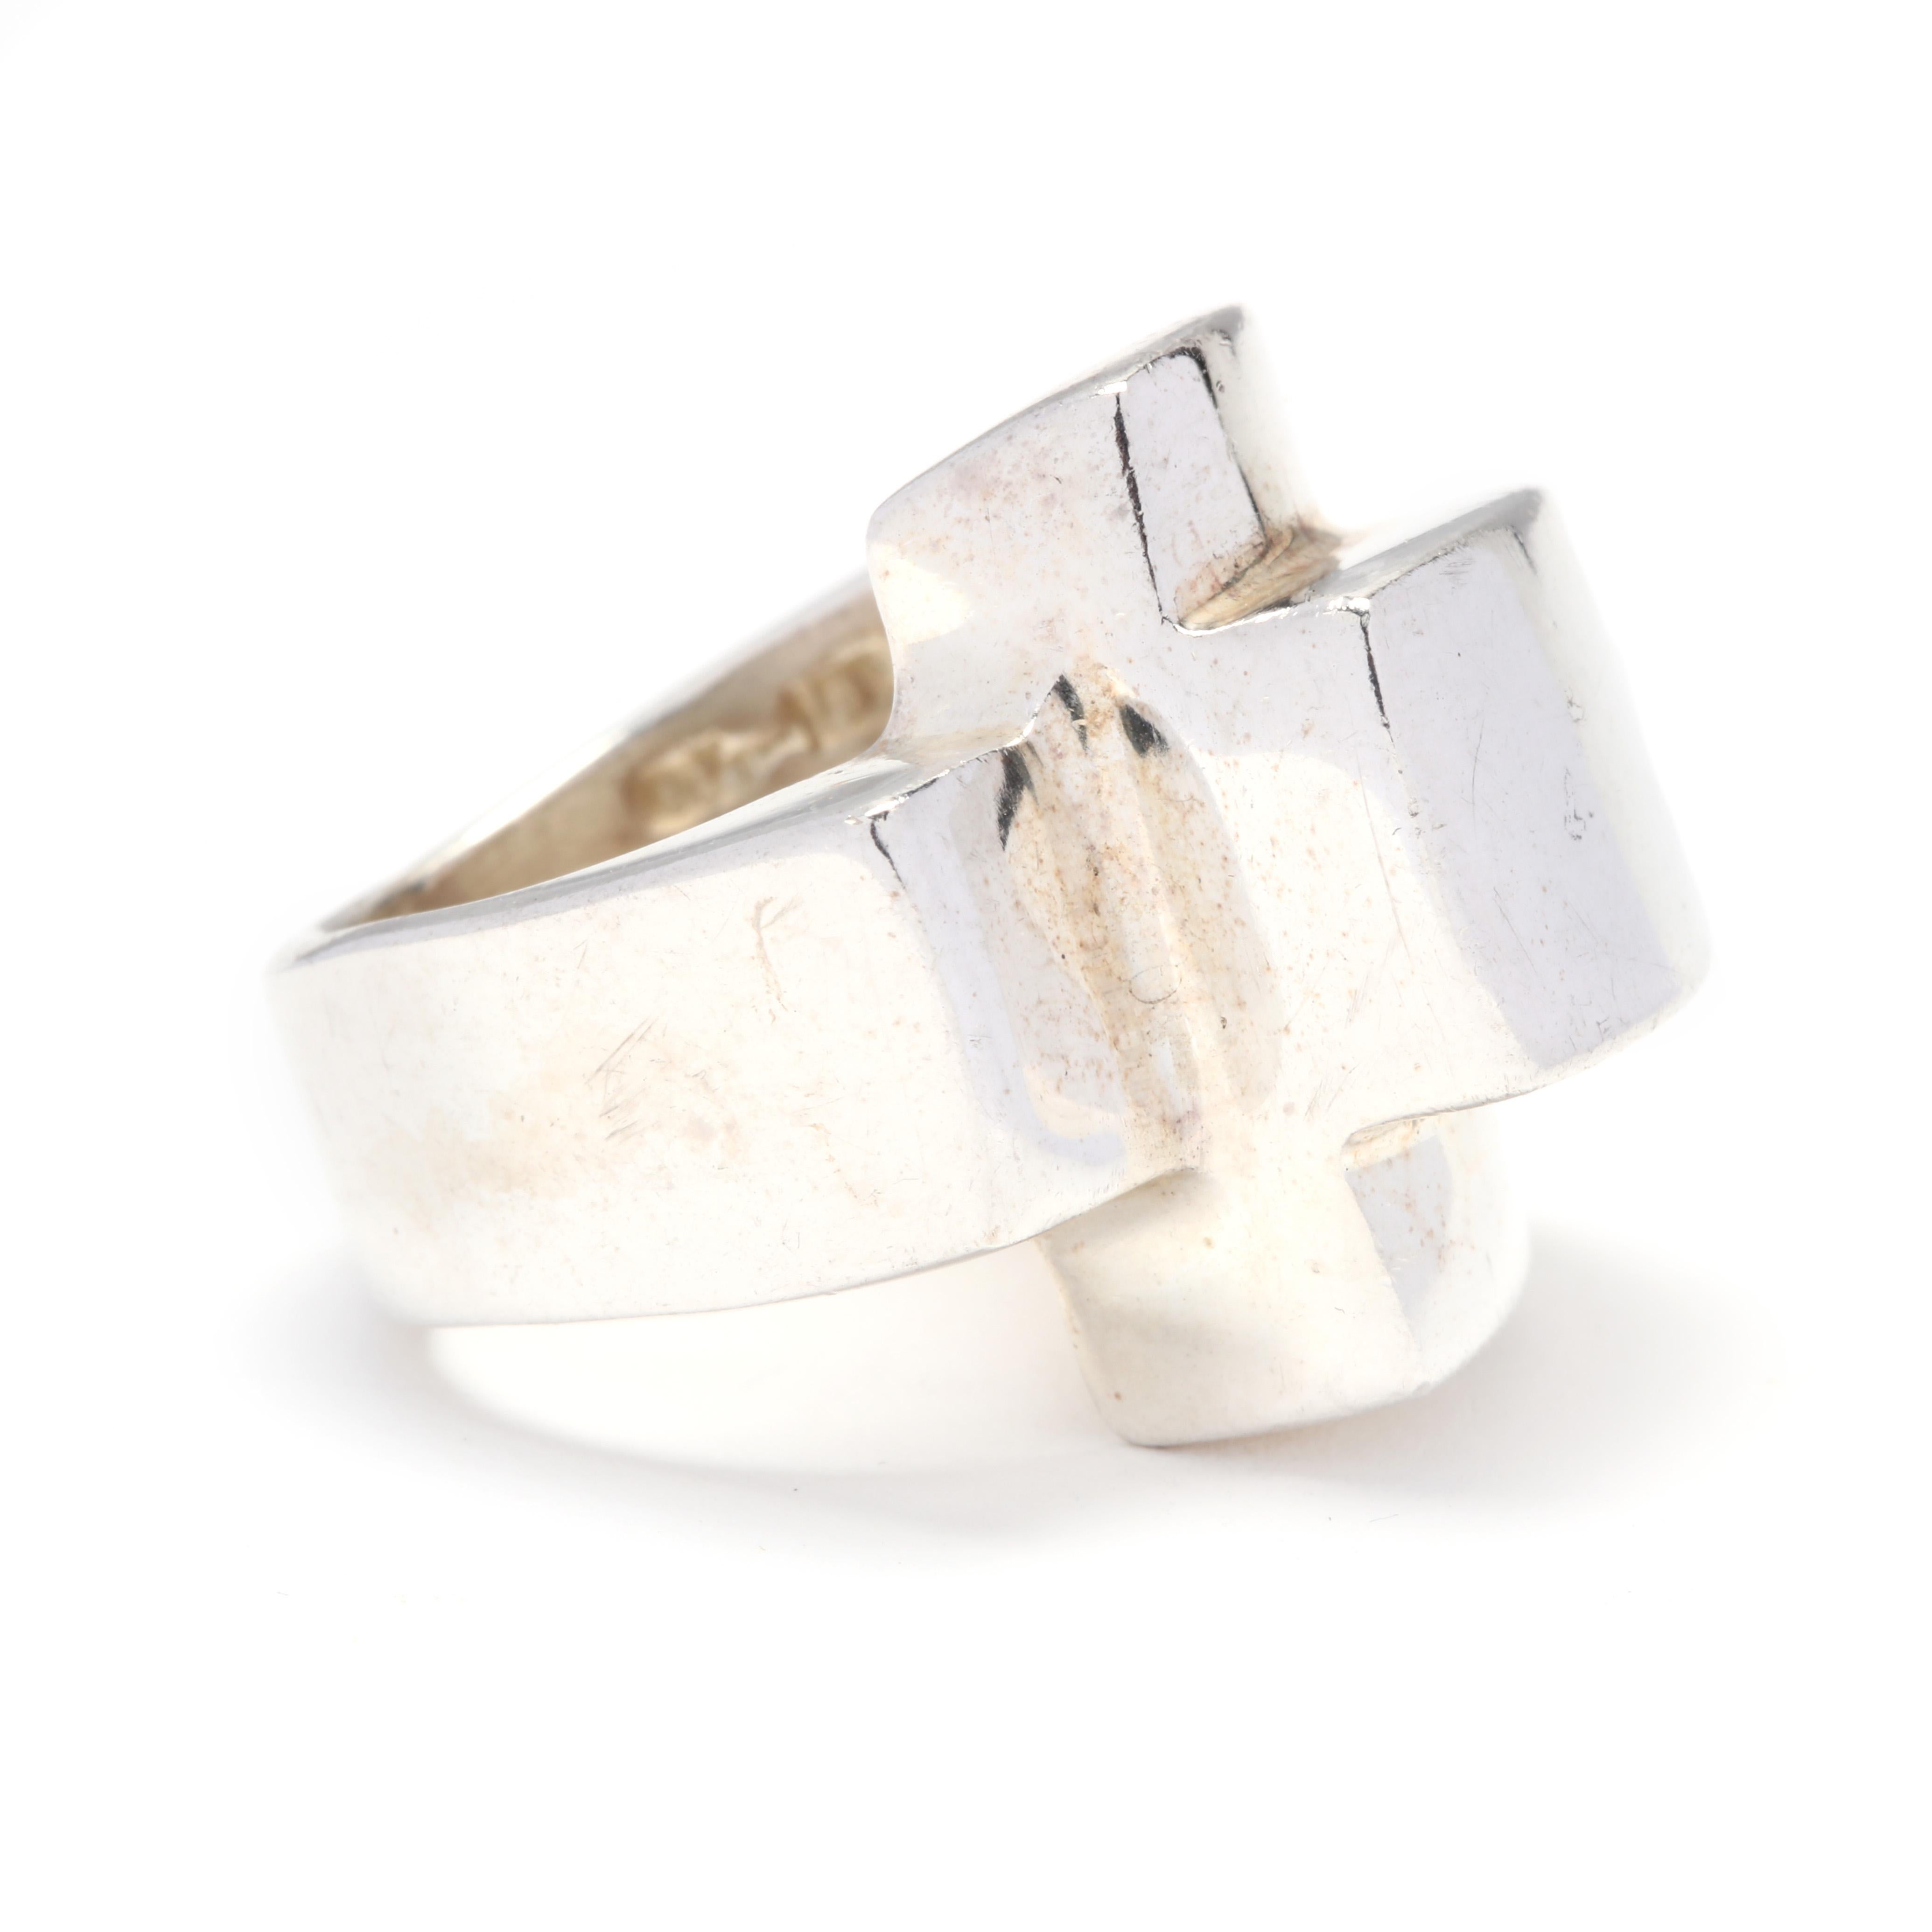 A sterling silver ridged statement ring. A domed ring with a rectangular ridged crossover motif and a tapered shank.

Ring Size 6.25

Length: 13/16 in.

19.35 grams

* Please note that this is a vintage item and may show signs of wear. It has been